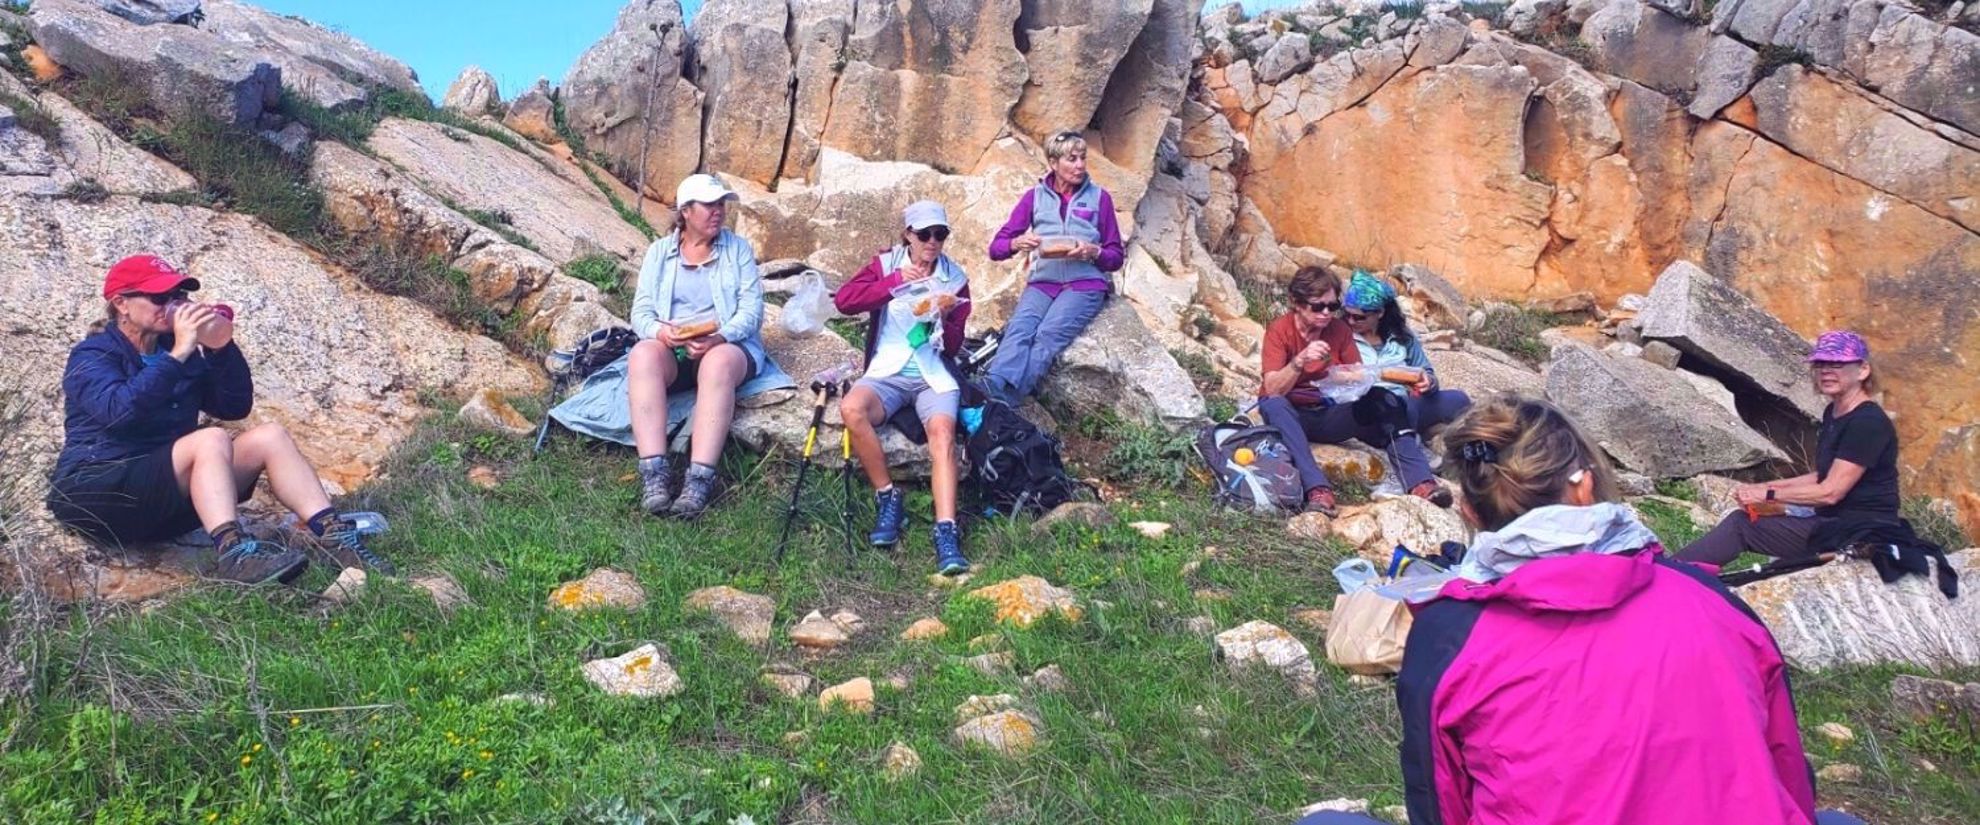 picnic lunch while hiking on the island of sicily